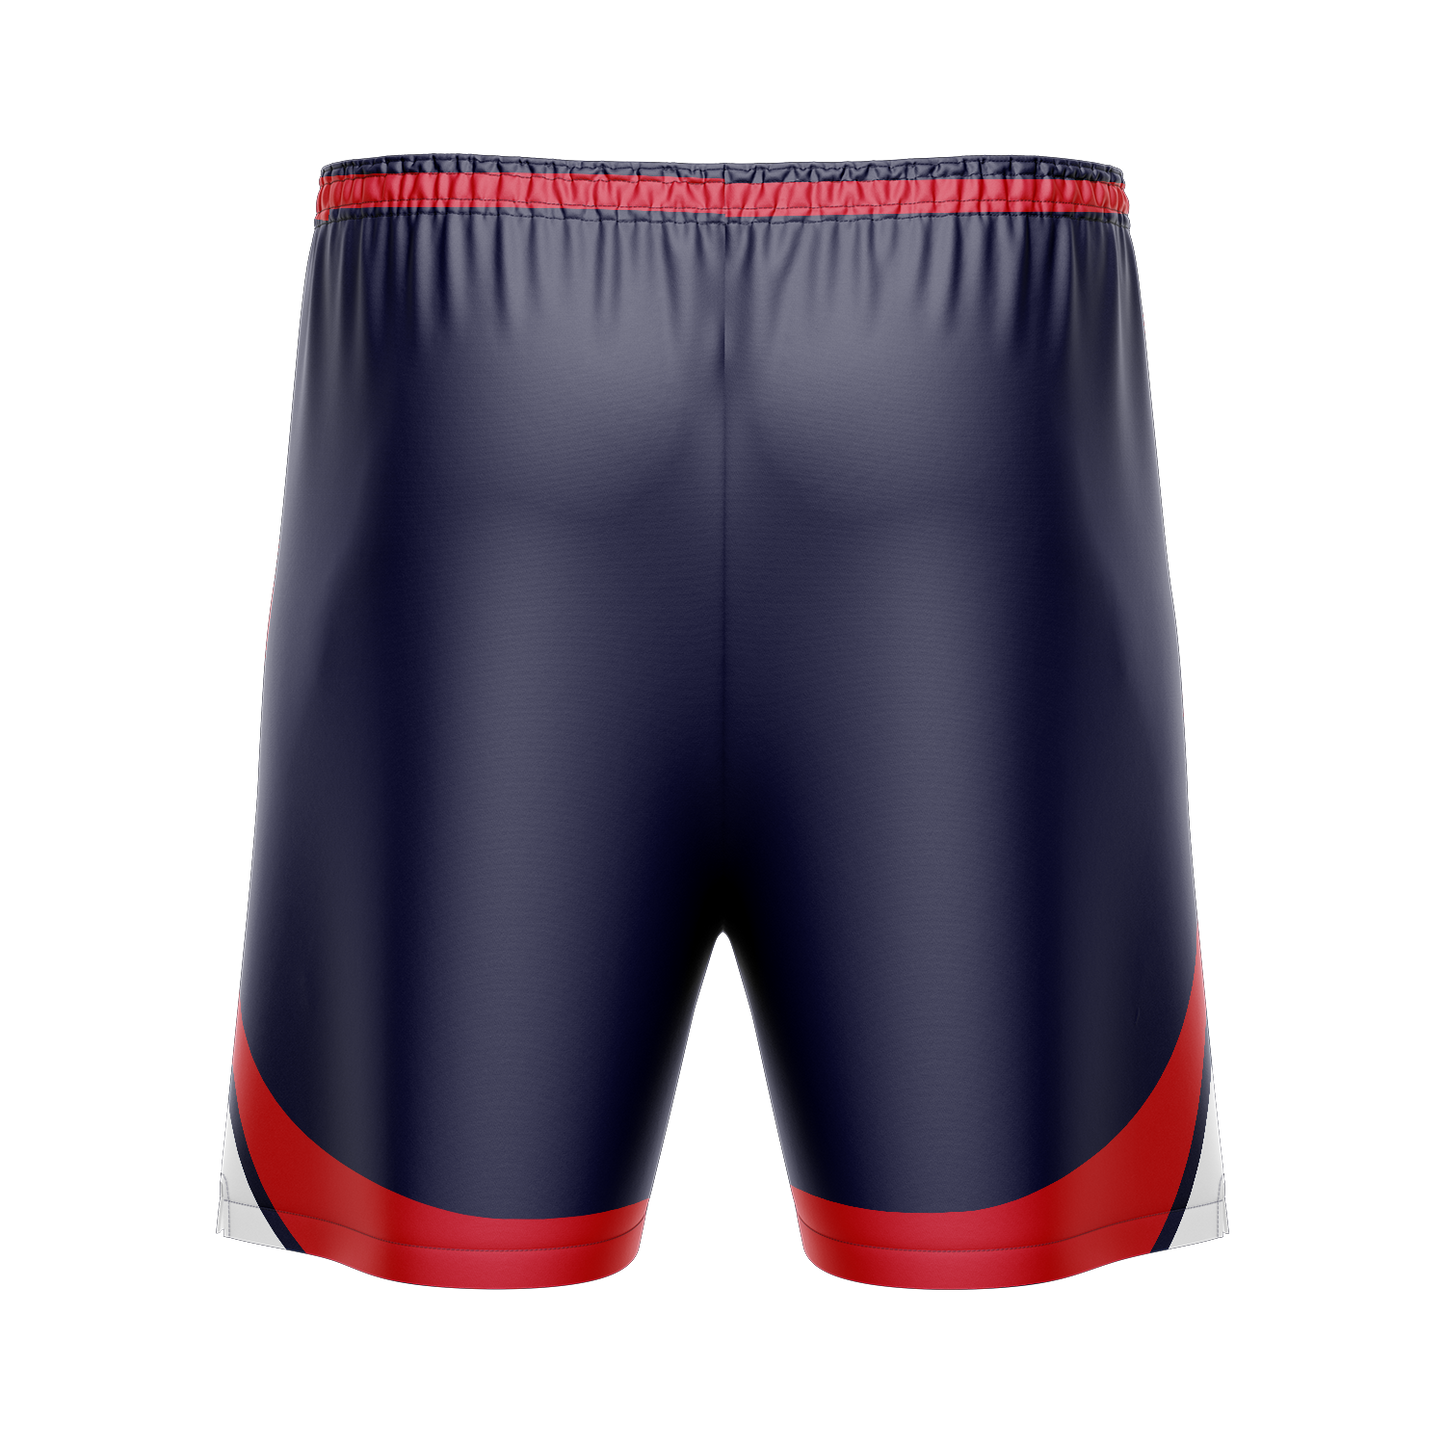 NORWOOD FLAMES CLUB PLAYER SHORTS (6 WEEKS FOR DELIVERY)